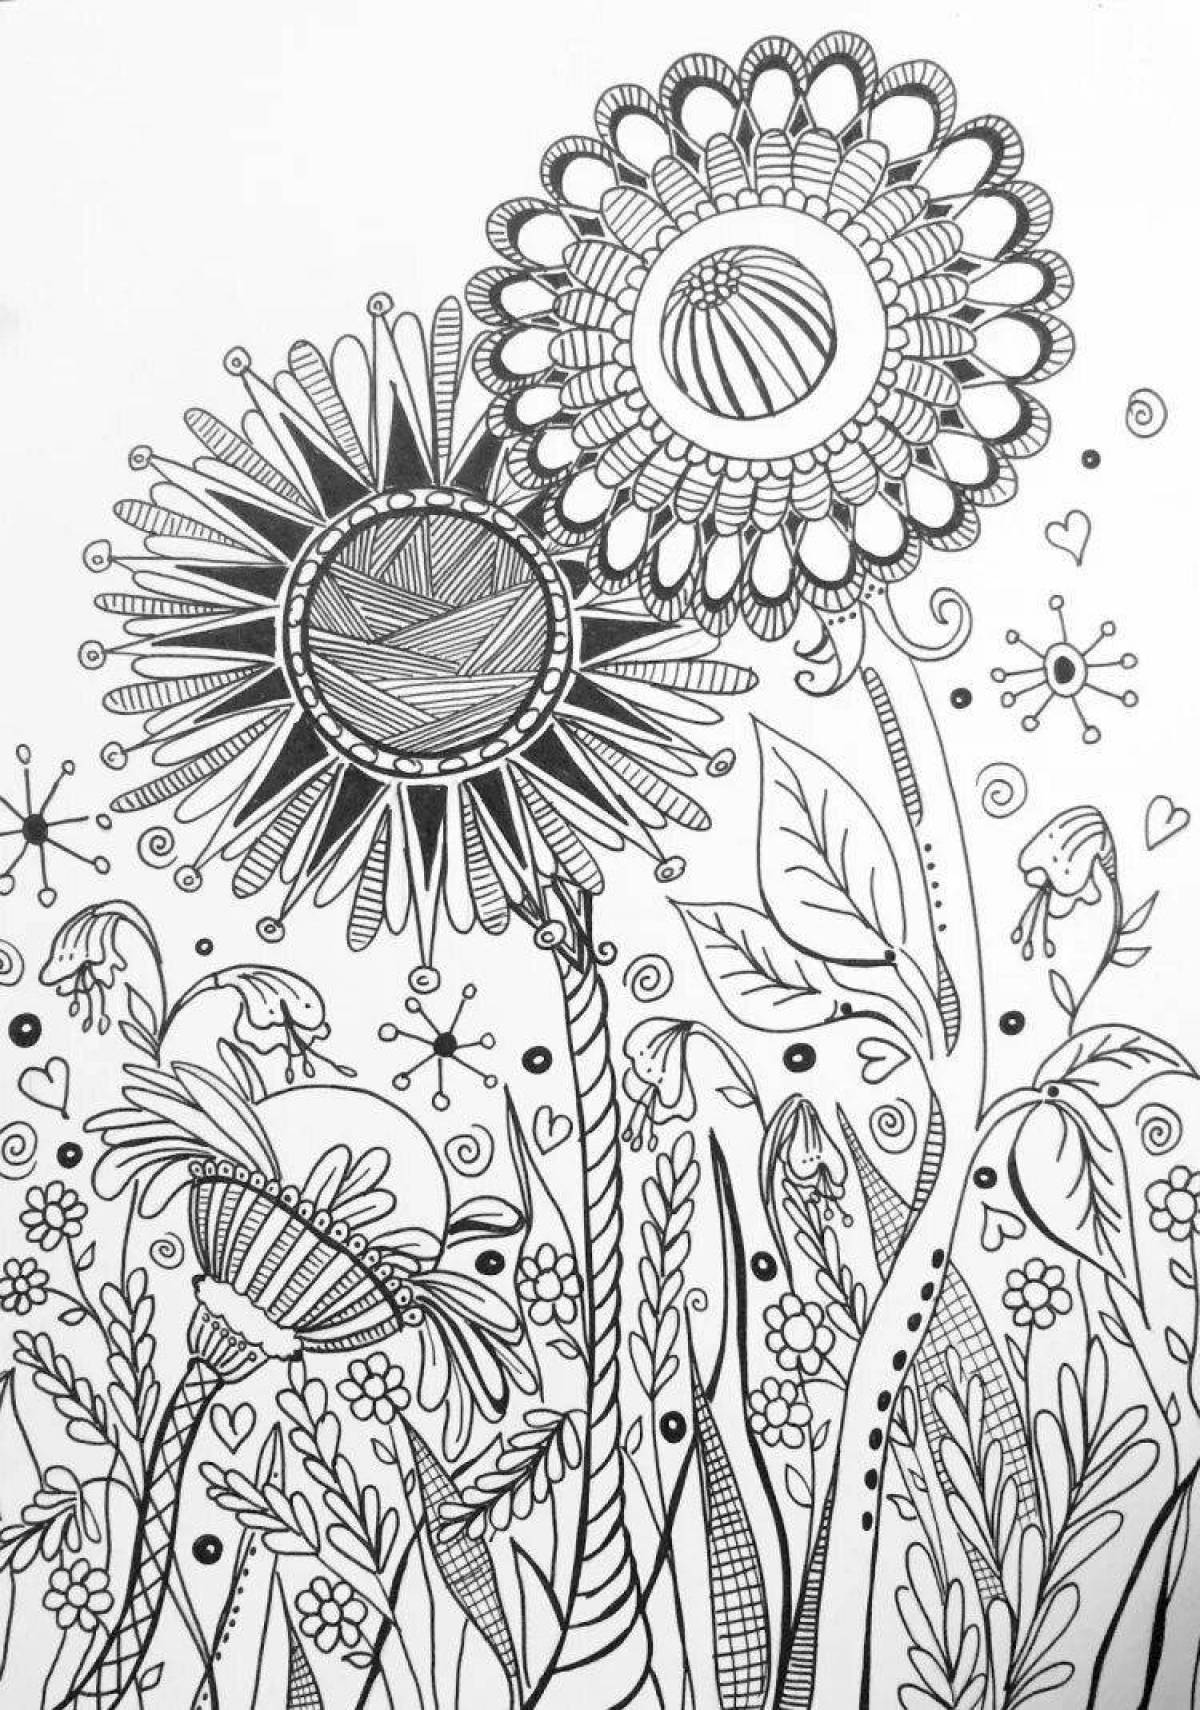 Charming coloring book for meditation and relaxation